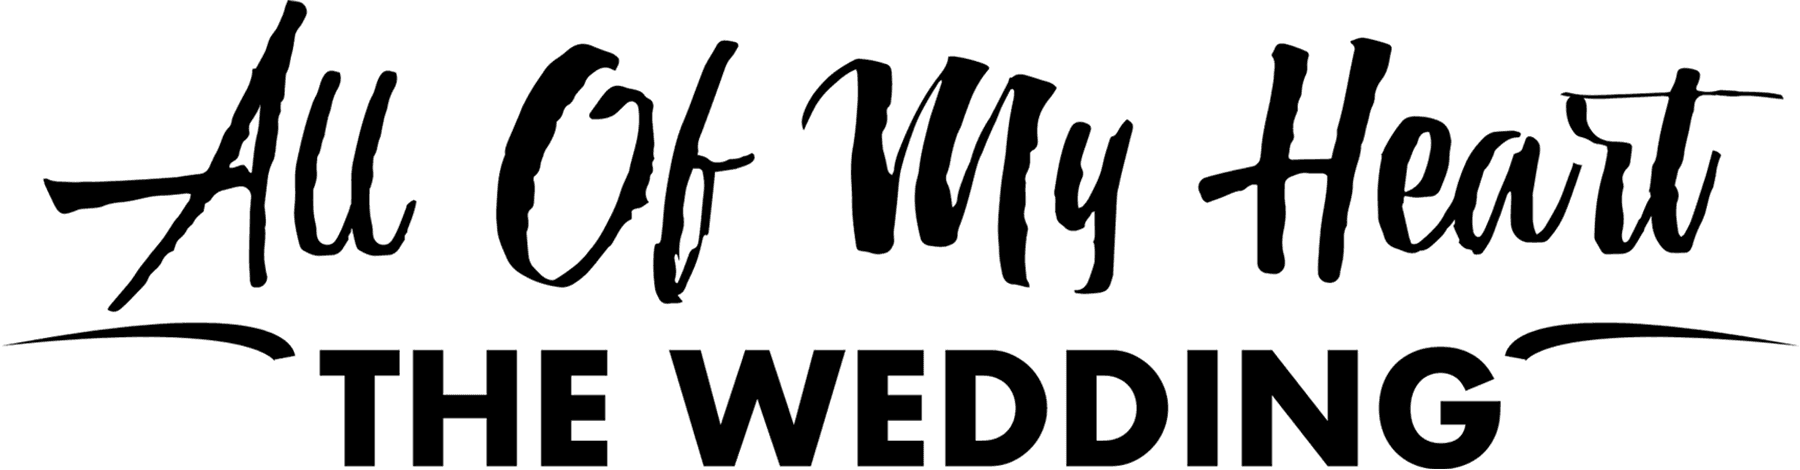 All of My Heart: The Wedding logo